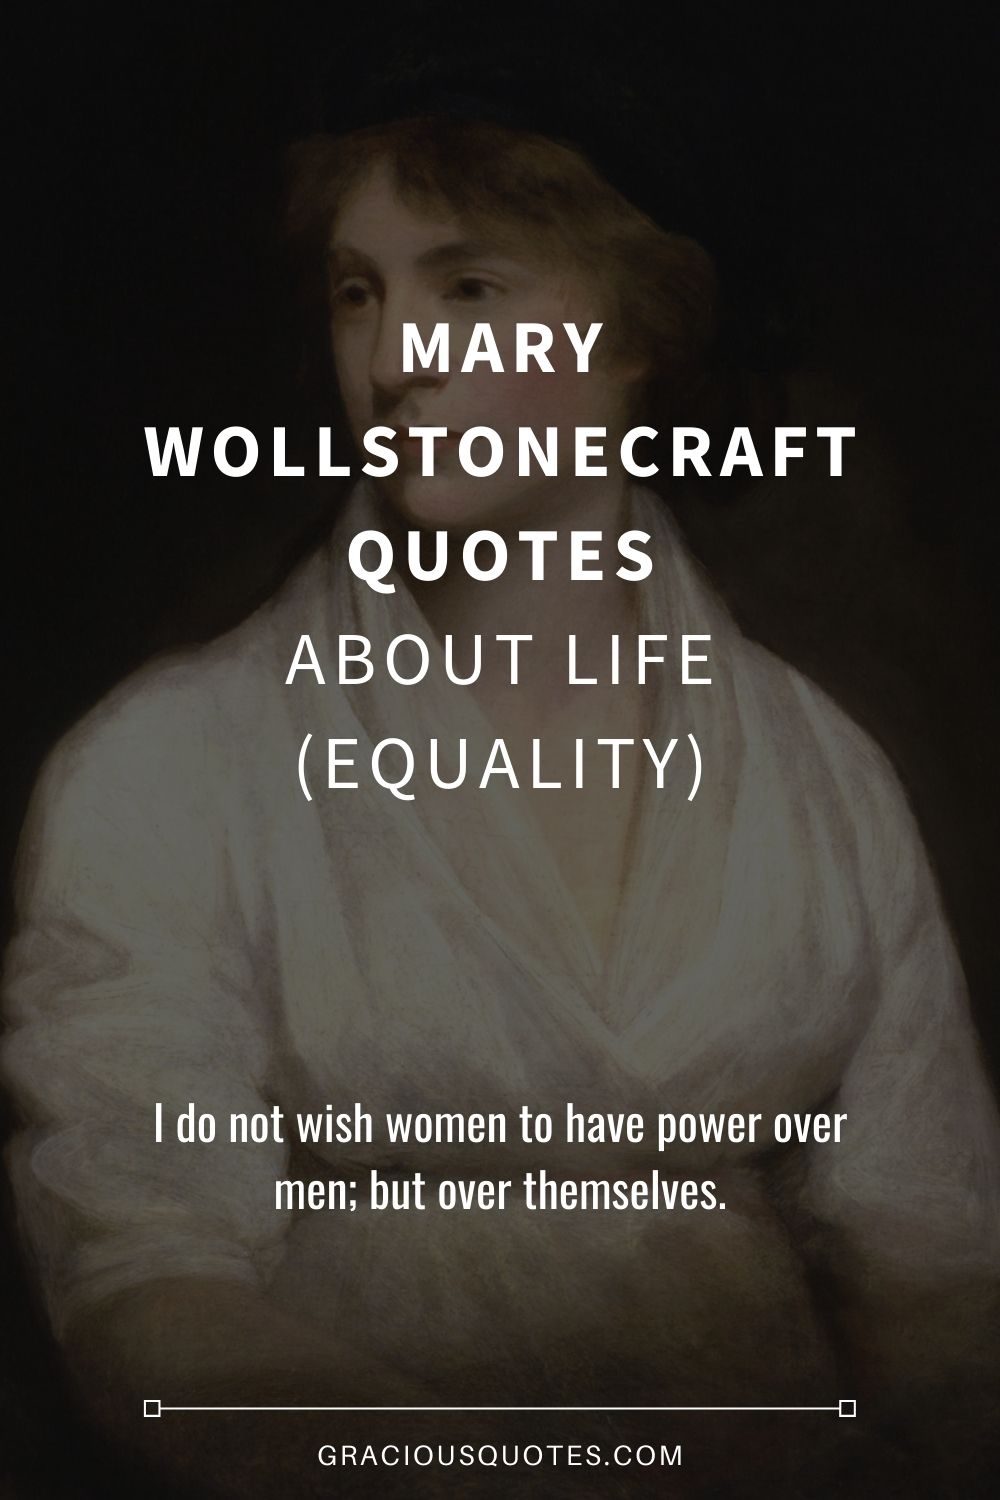 Mary Wollstonecraft Quotes About Life (EQUALITY) - Gracious Quotes